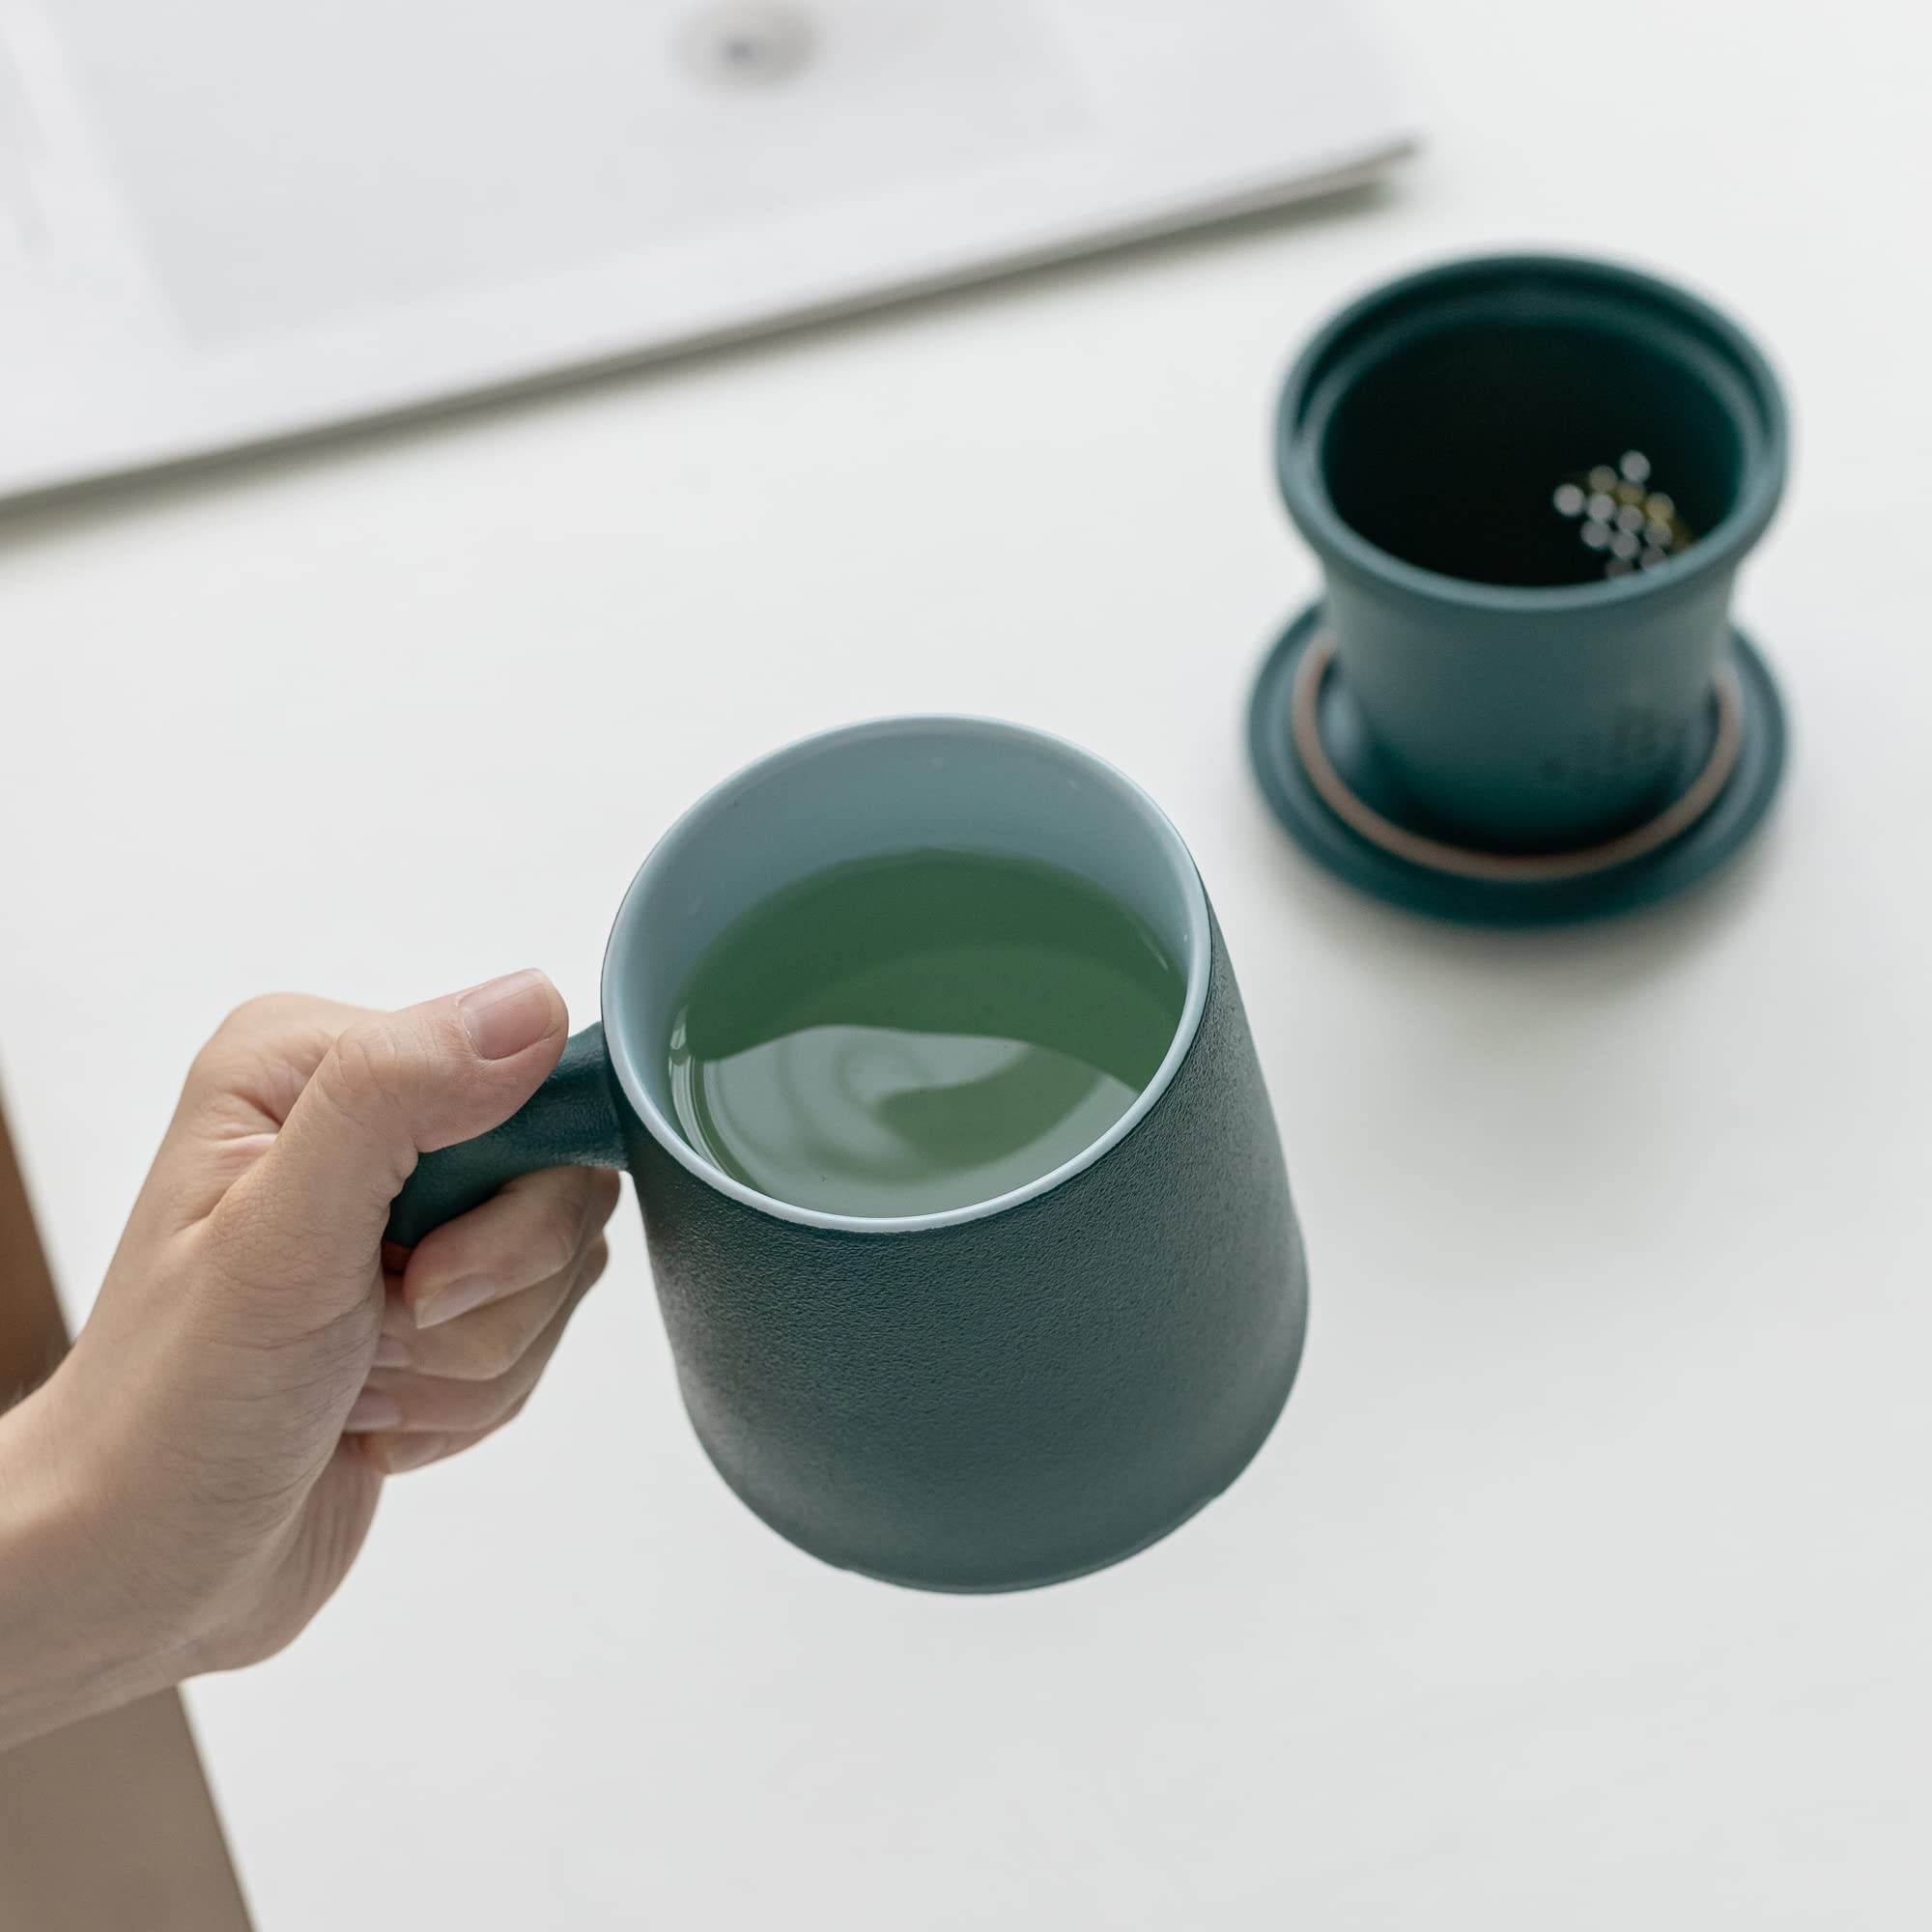 HEER Ceramic Infusion Tea Mug with Infuser and Lid for Steeping Loose Leaf Tea, Chinese Modern Wooden Handle Diffuser Coffe Tea Cup for Home Office. 13.5oz (400ml) (Green)